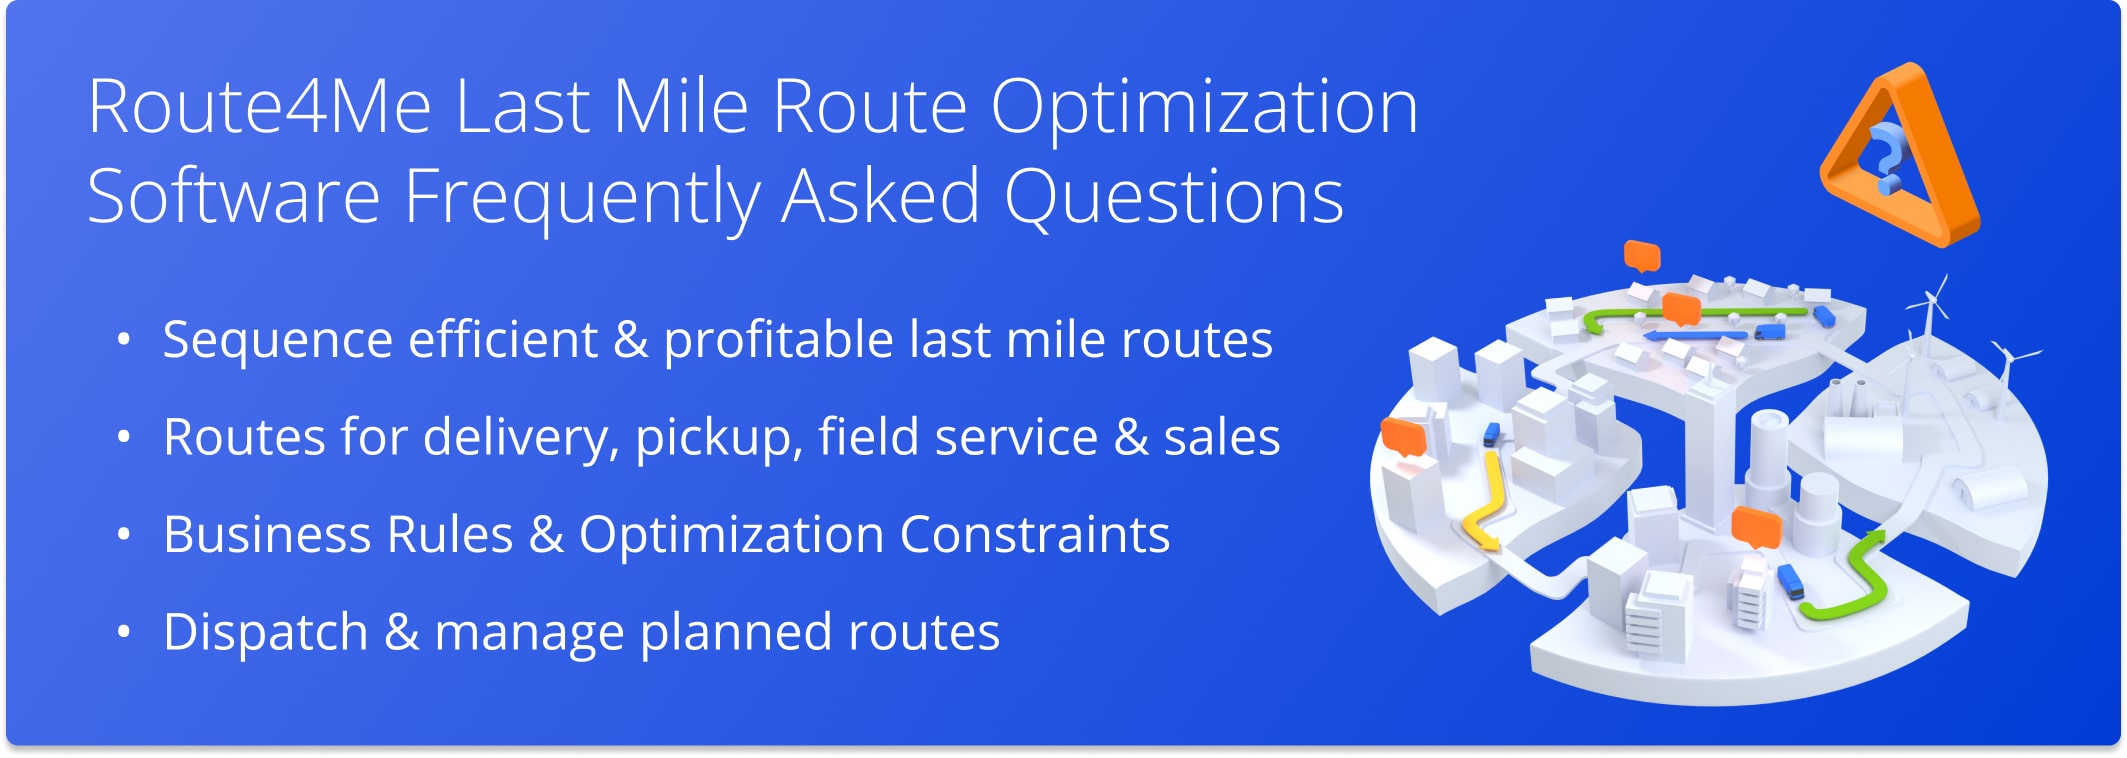 Route4Me Route Optimization Software: Sequence efficient multi-address routes for last mile delivery drivers, field service, and sales.